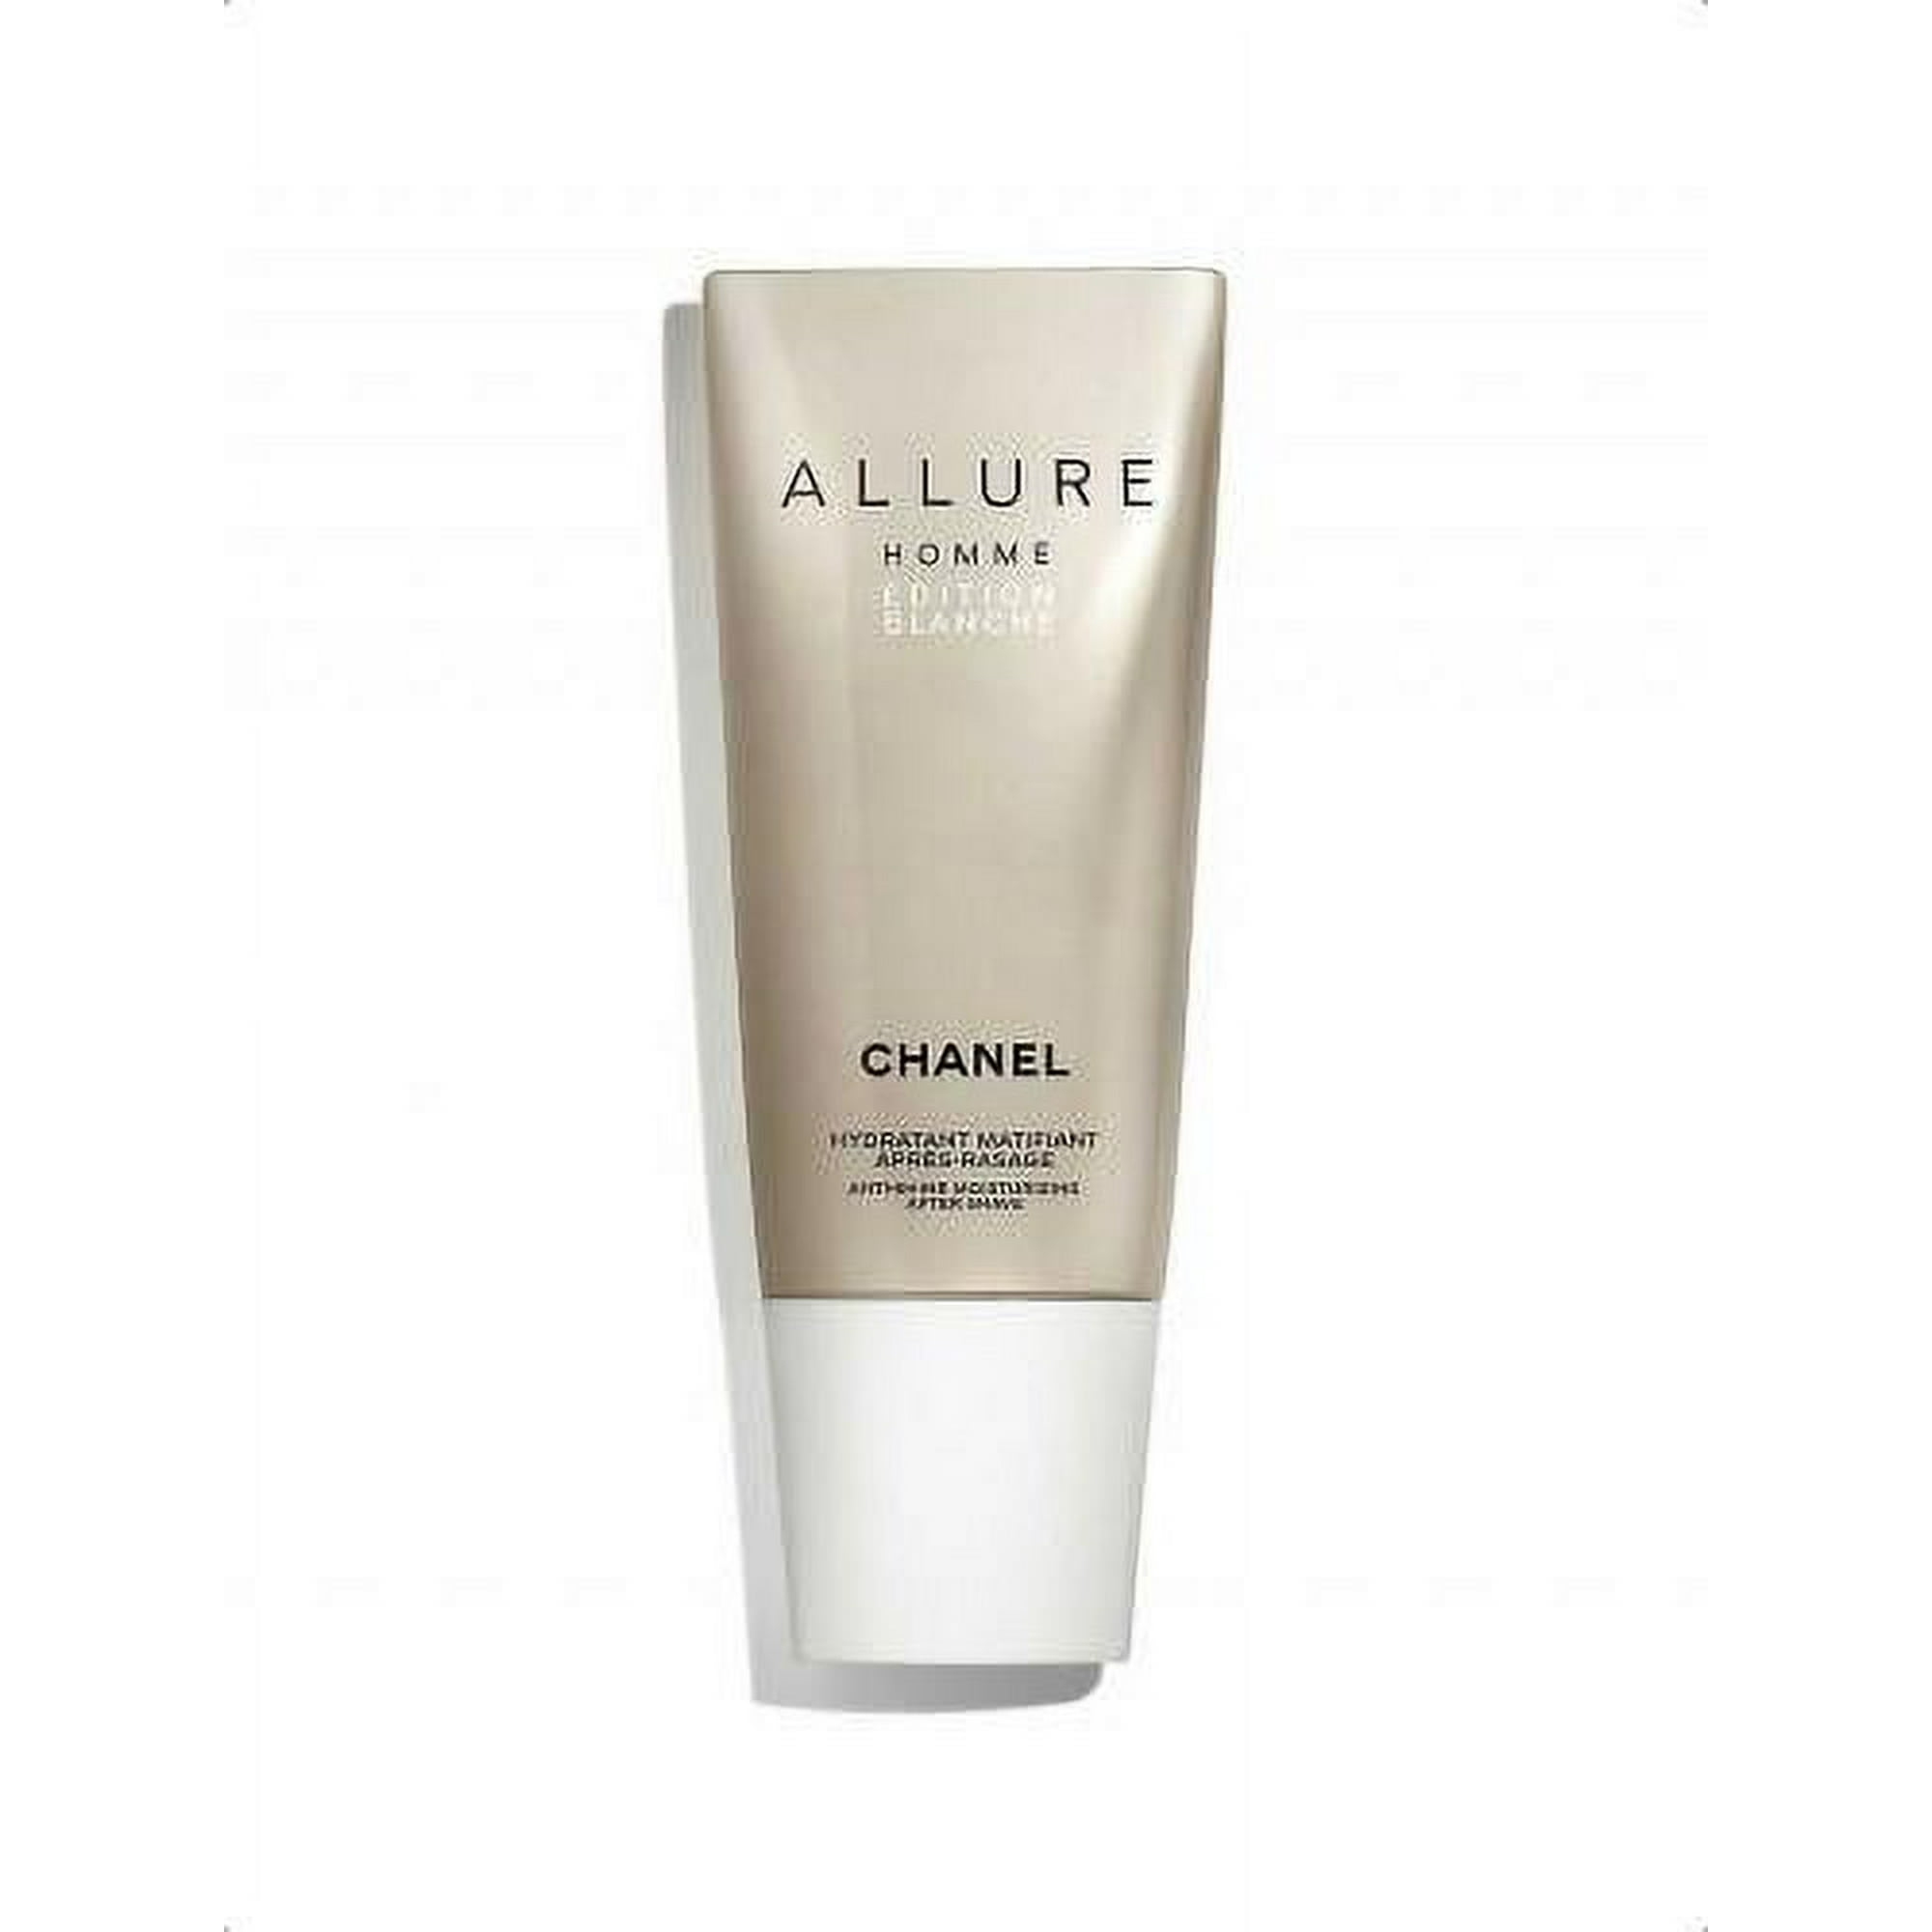 Chanel allure homme edition blanche, Beauty & Personal Care